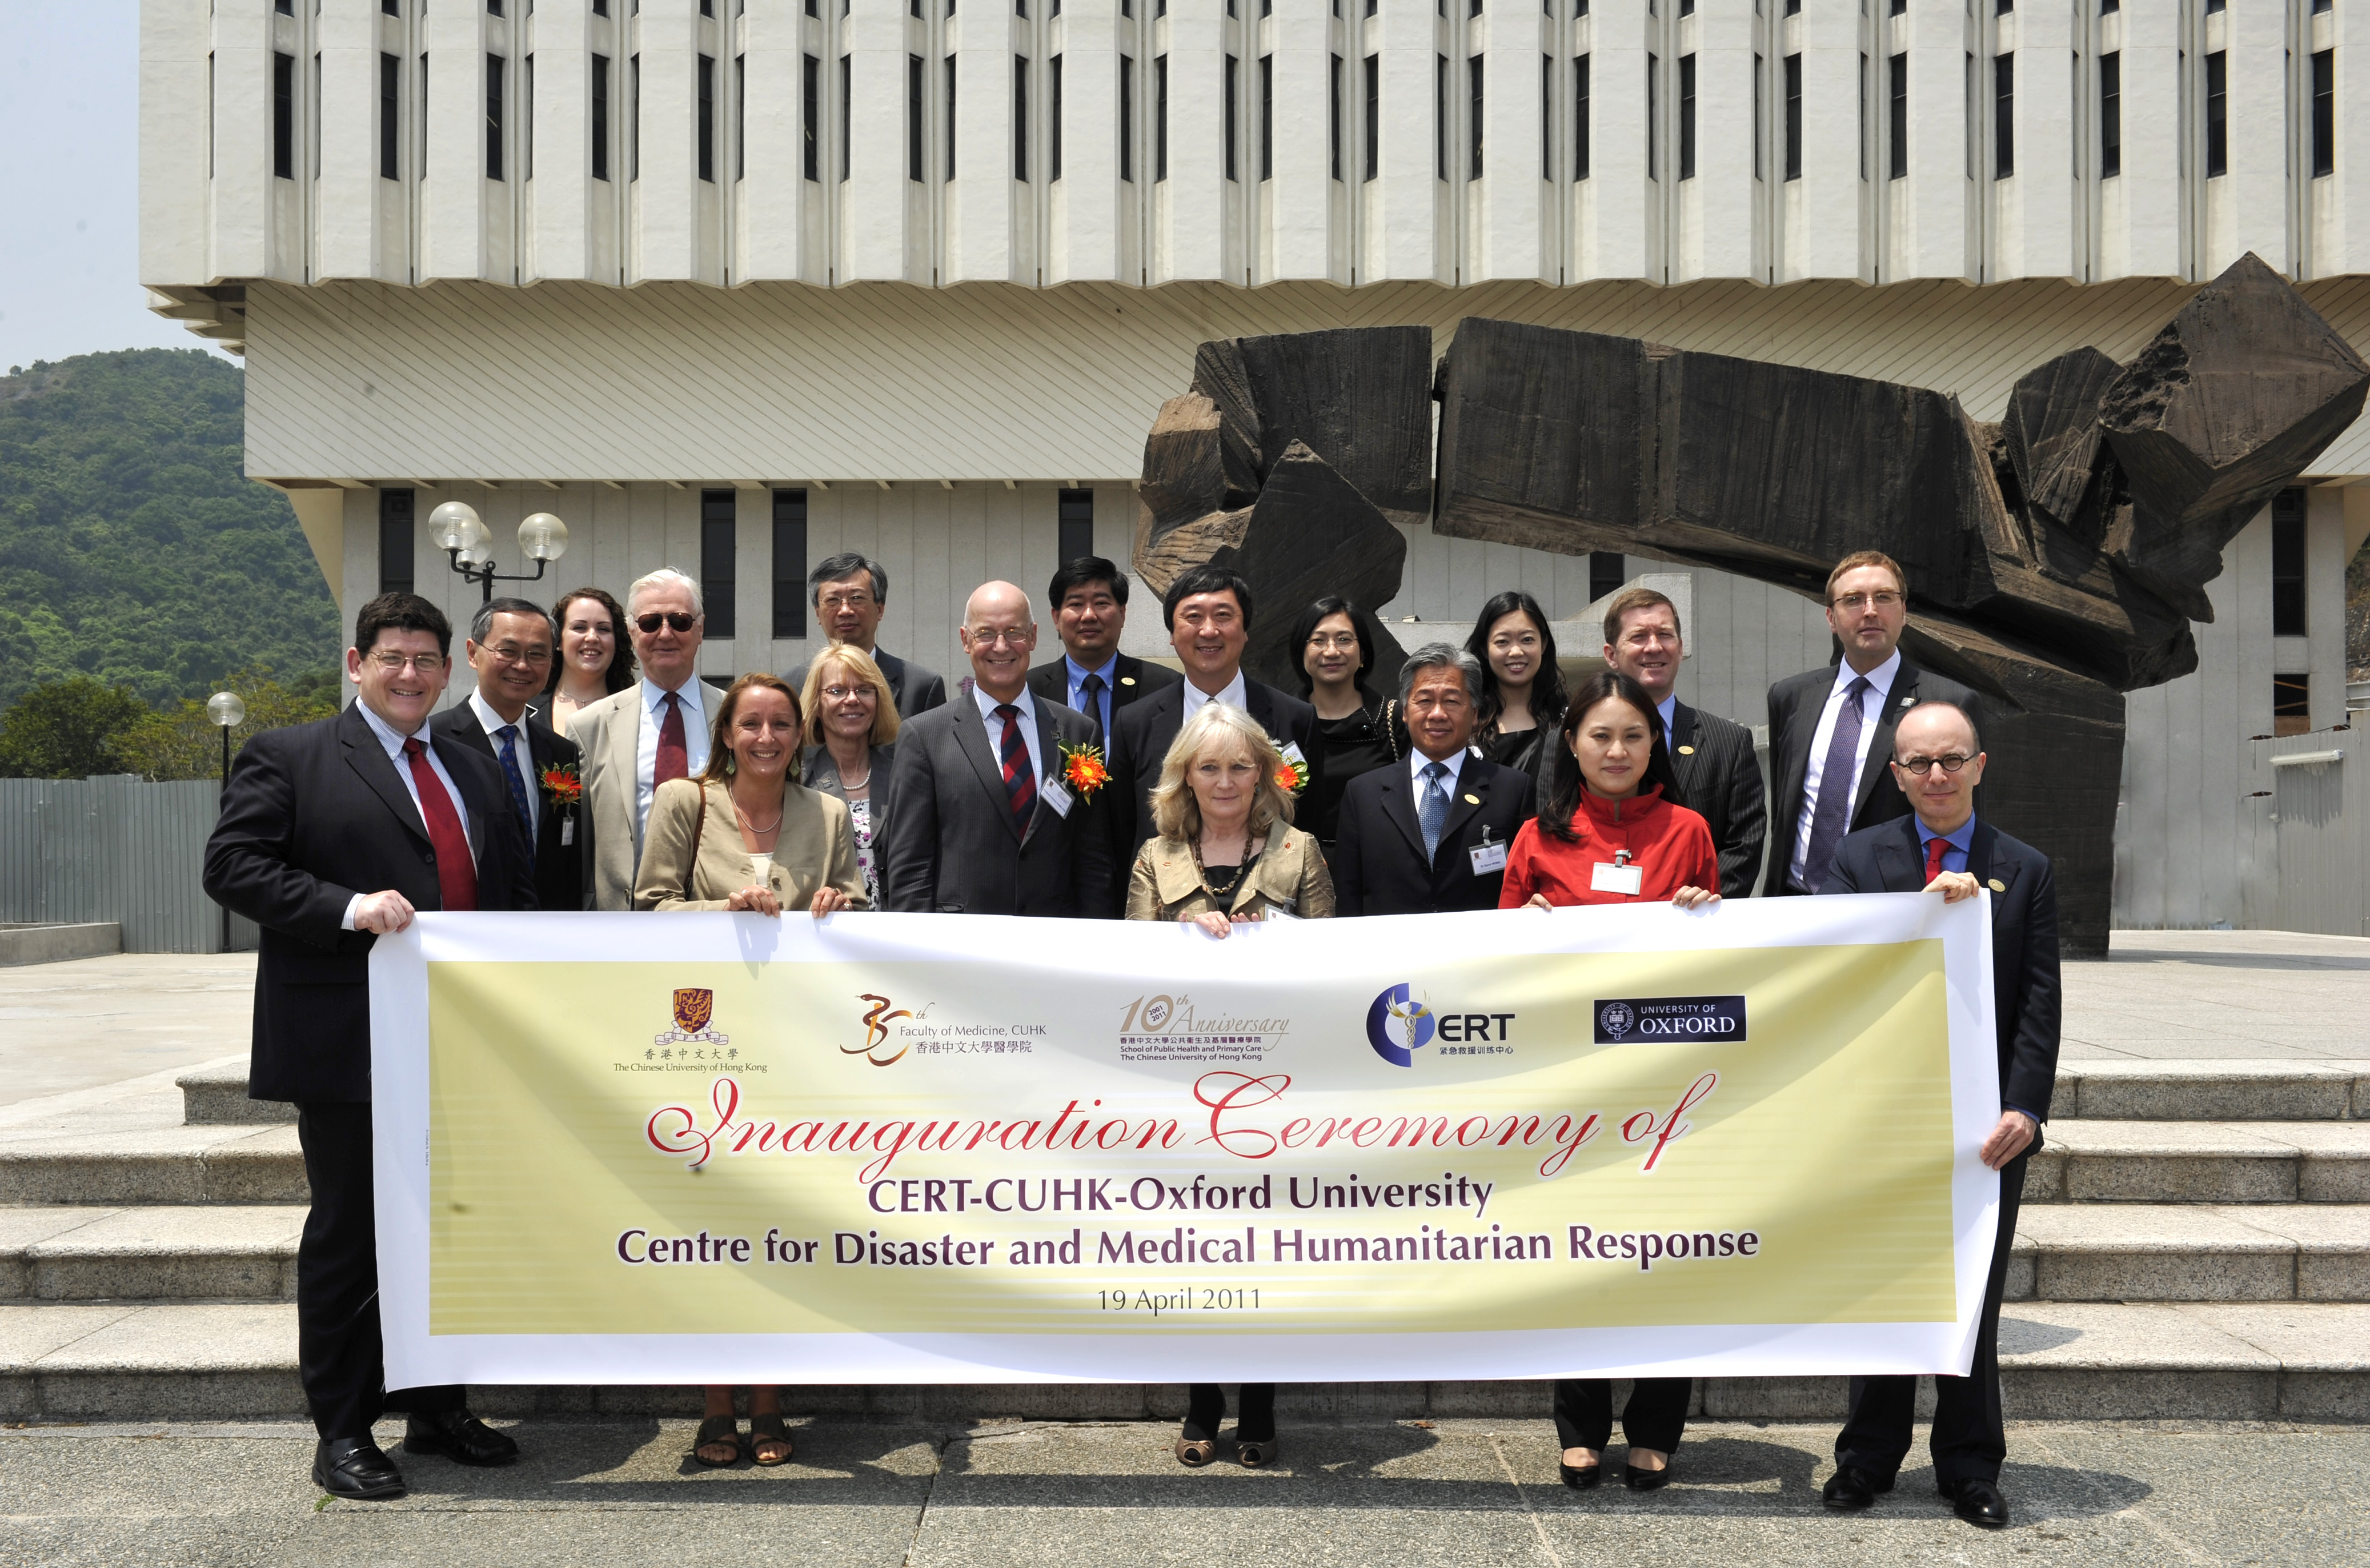 A group photo taken after the CCOUC Inauguration Ceremony on CUHK campus